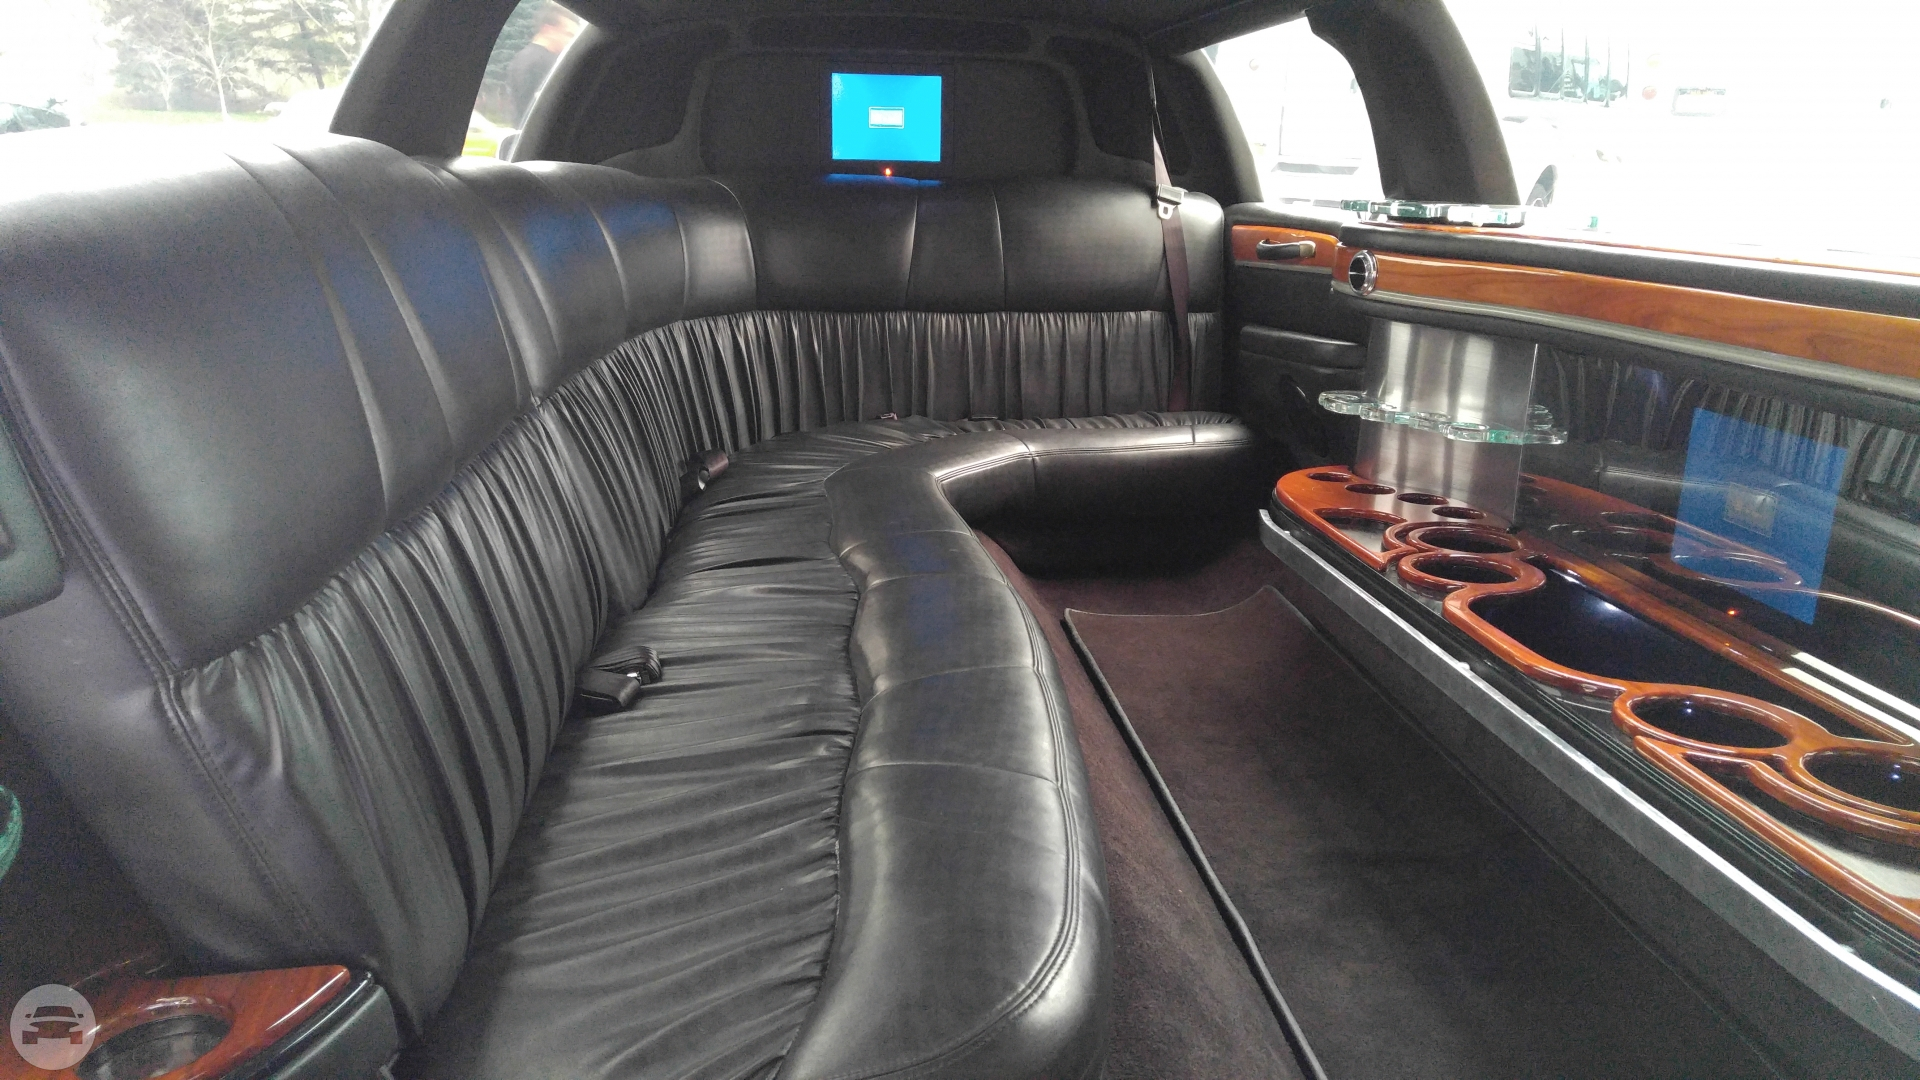 10 PASSENGER STRETCH LINCOLN- 302
Limo /
Depew, NY

 / Hourly $0.00
